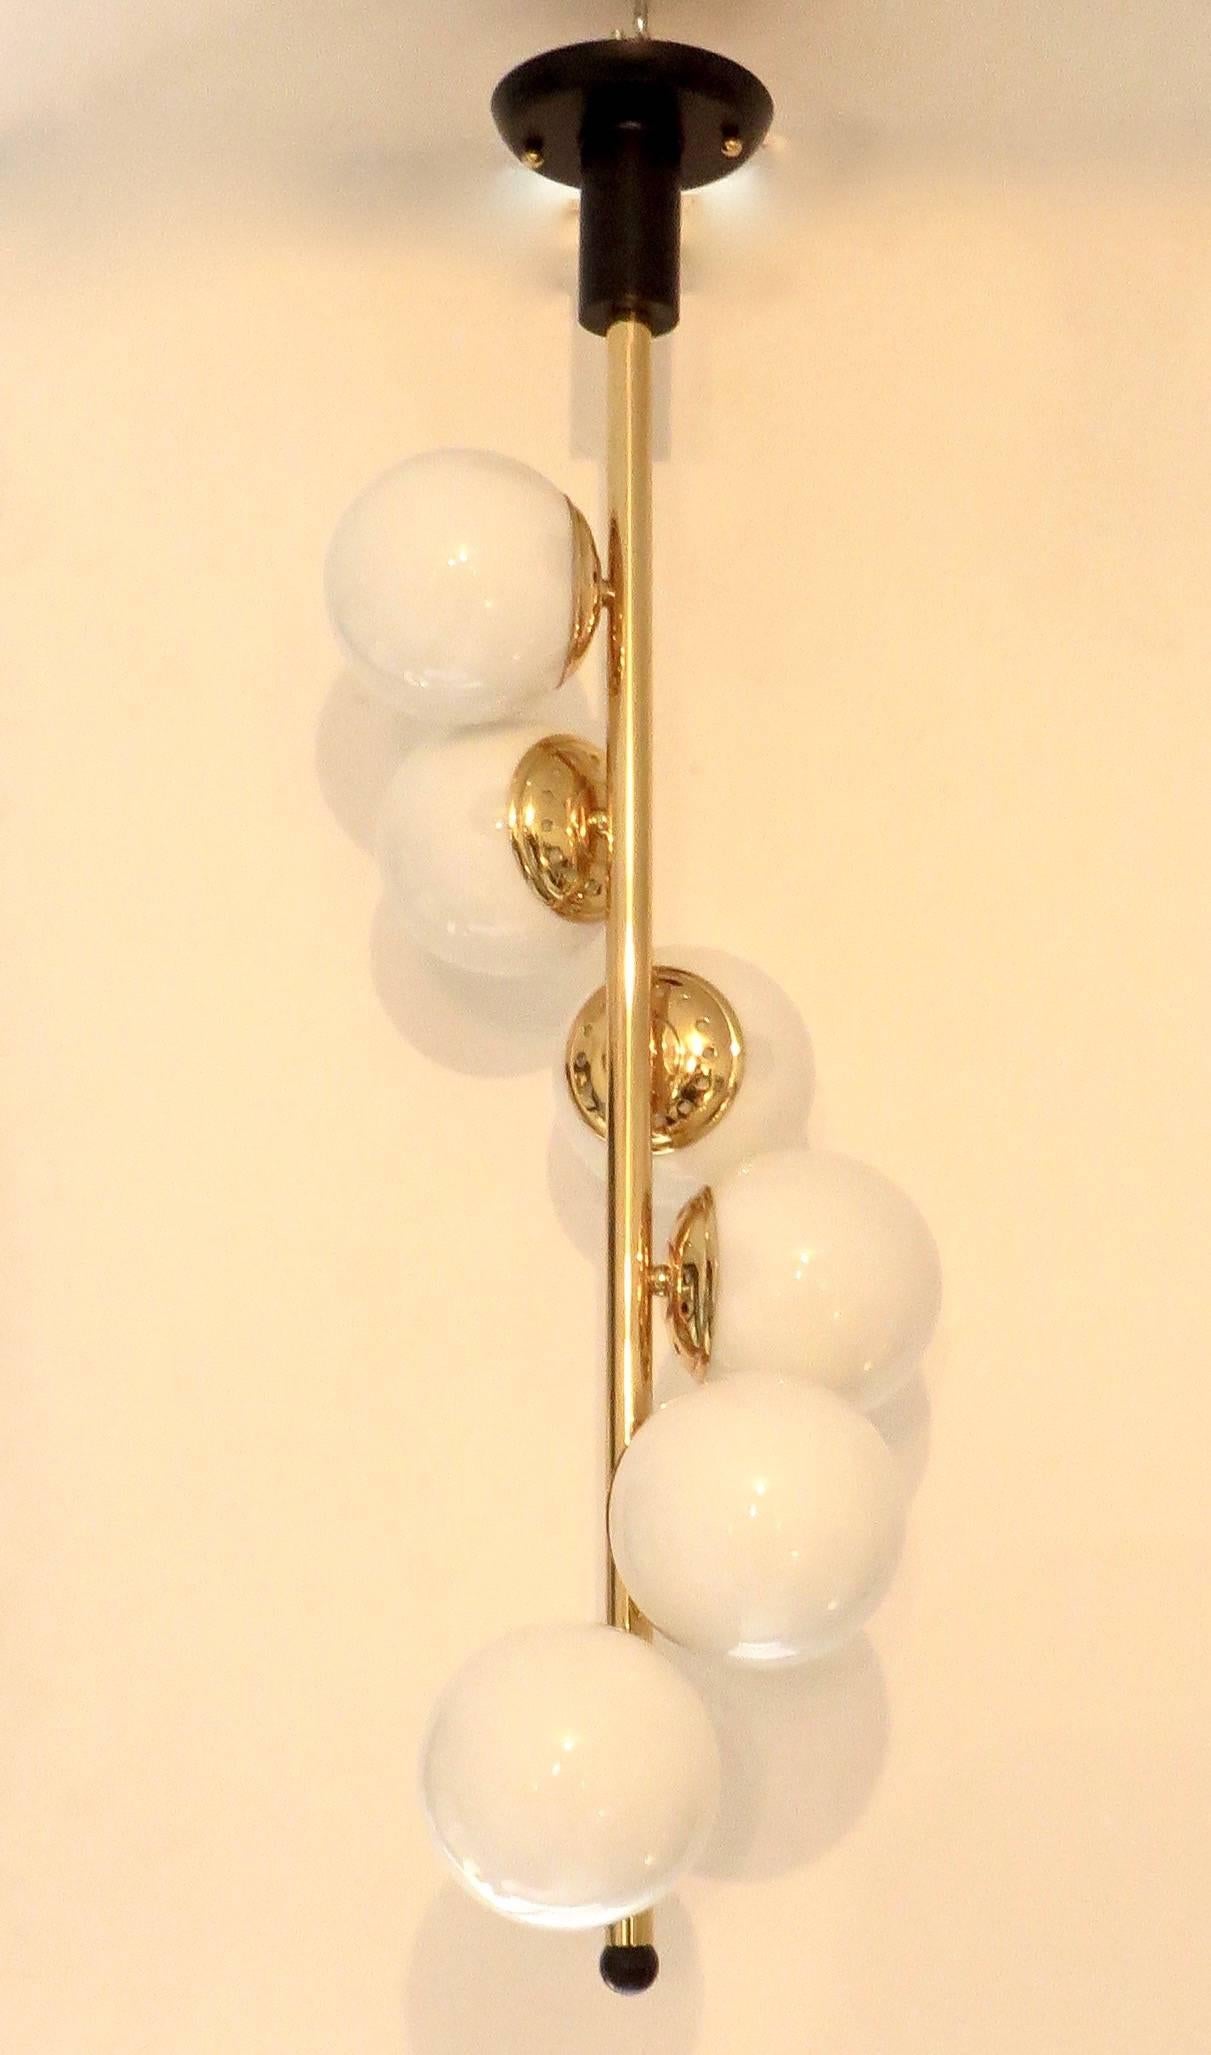 An iconic Italian chandelier by Stilnovo with the glass globes descending in a pattern down the central brass pole. 
Restored and rewired. 
All original glass globes.
Overall dimension from the top of the ceiling cap to the bottom of the black